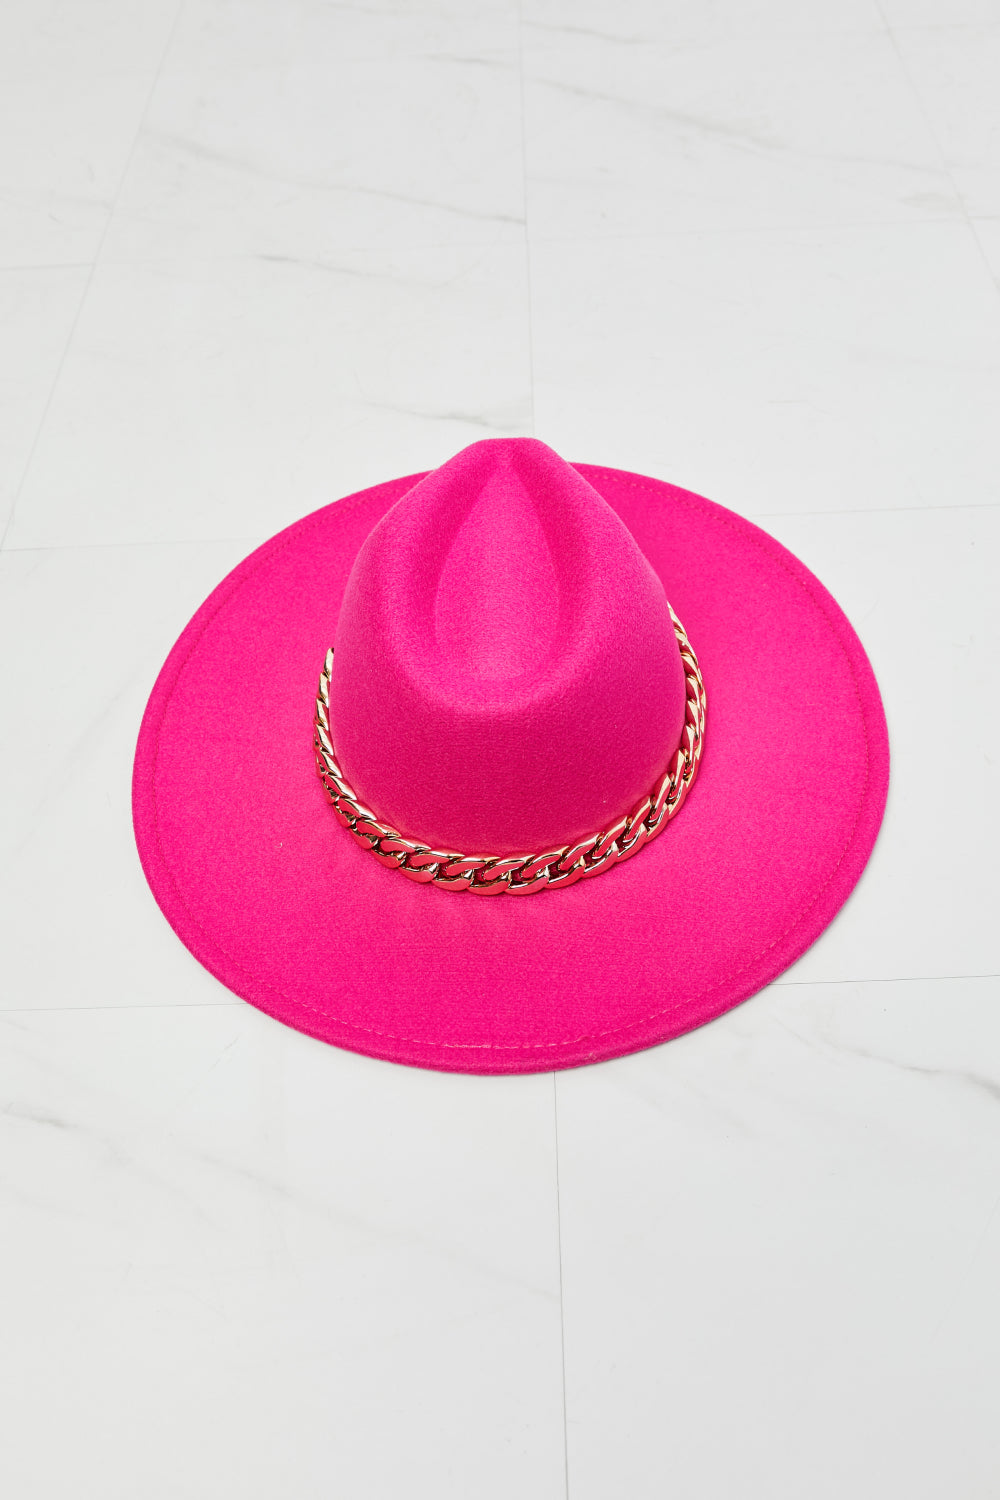 Fame Keep Your Promise Fedora Hat in Pink  Sunset and Swim   